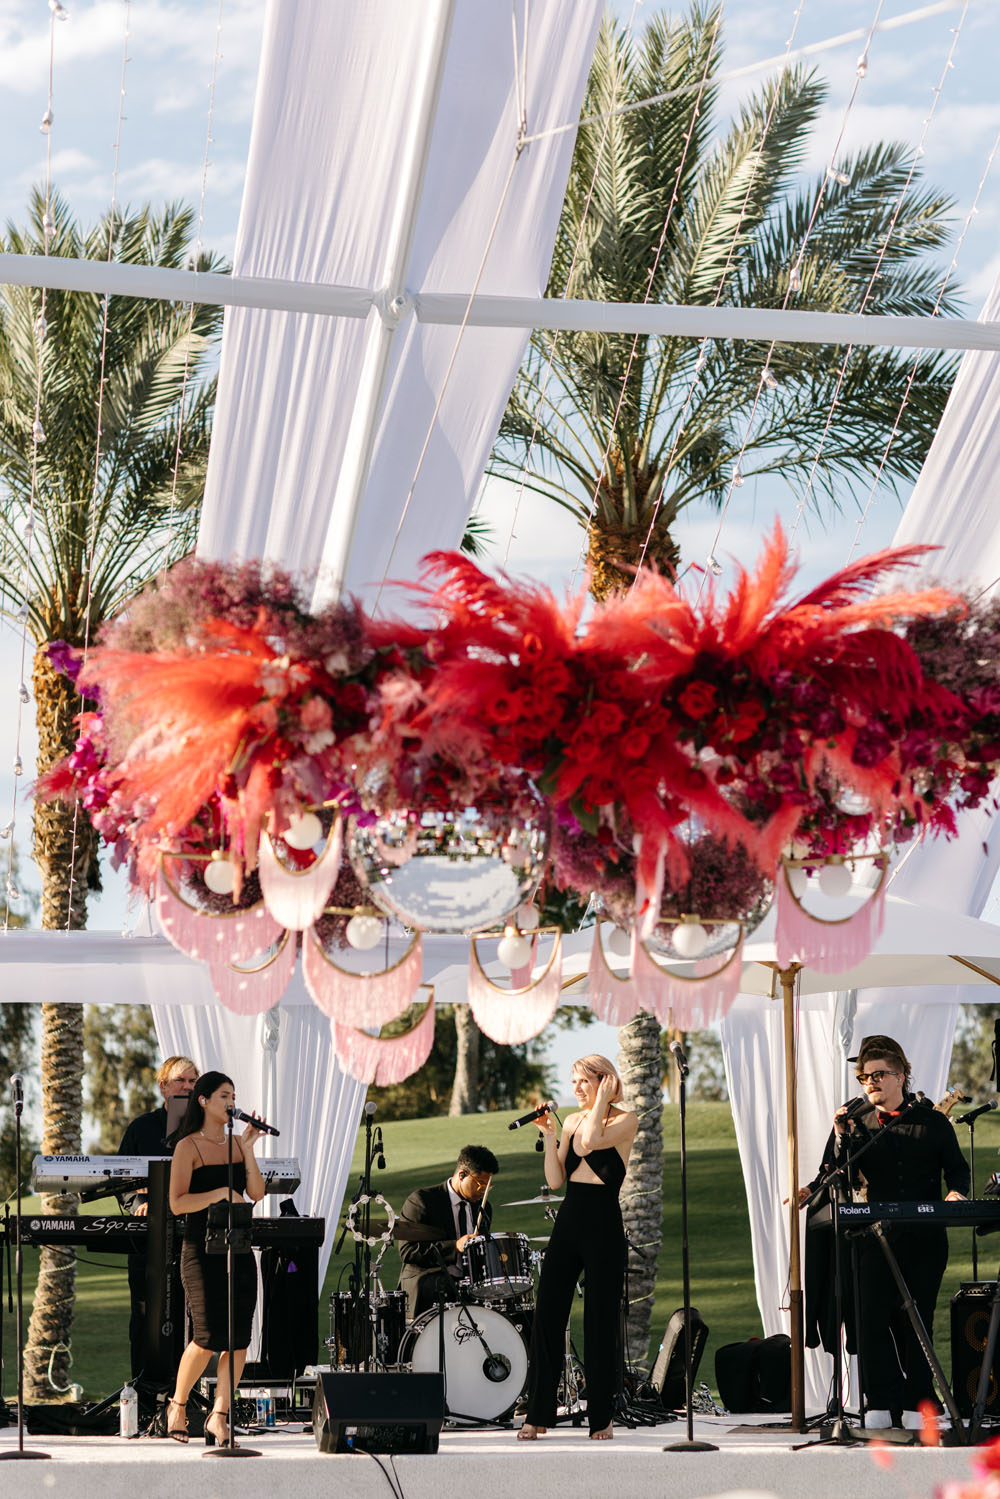  Indian Wells Golf Resort wedding with an electric color palette 